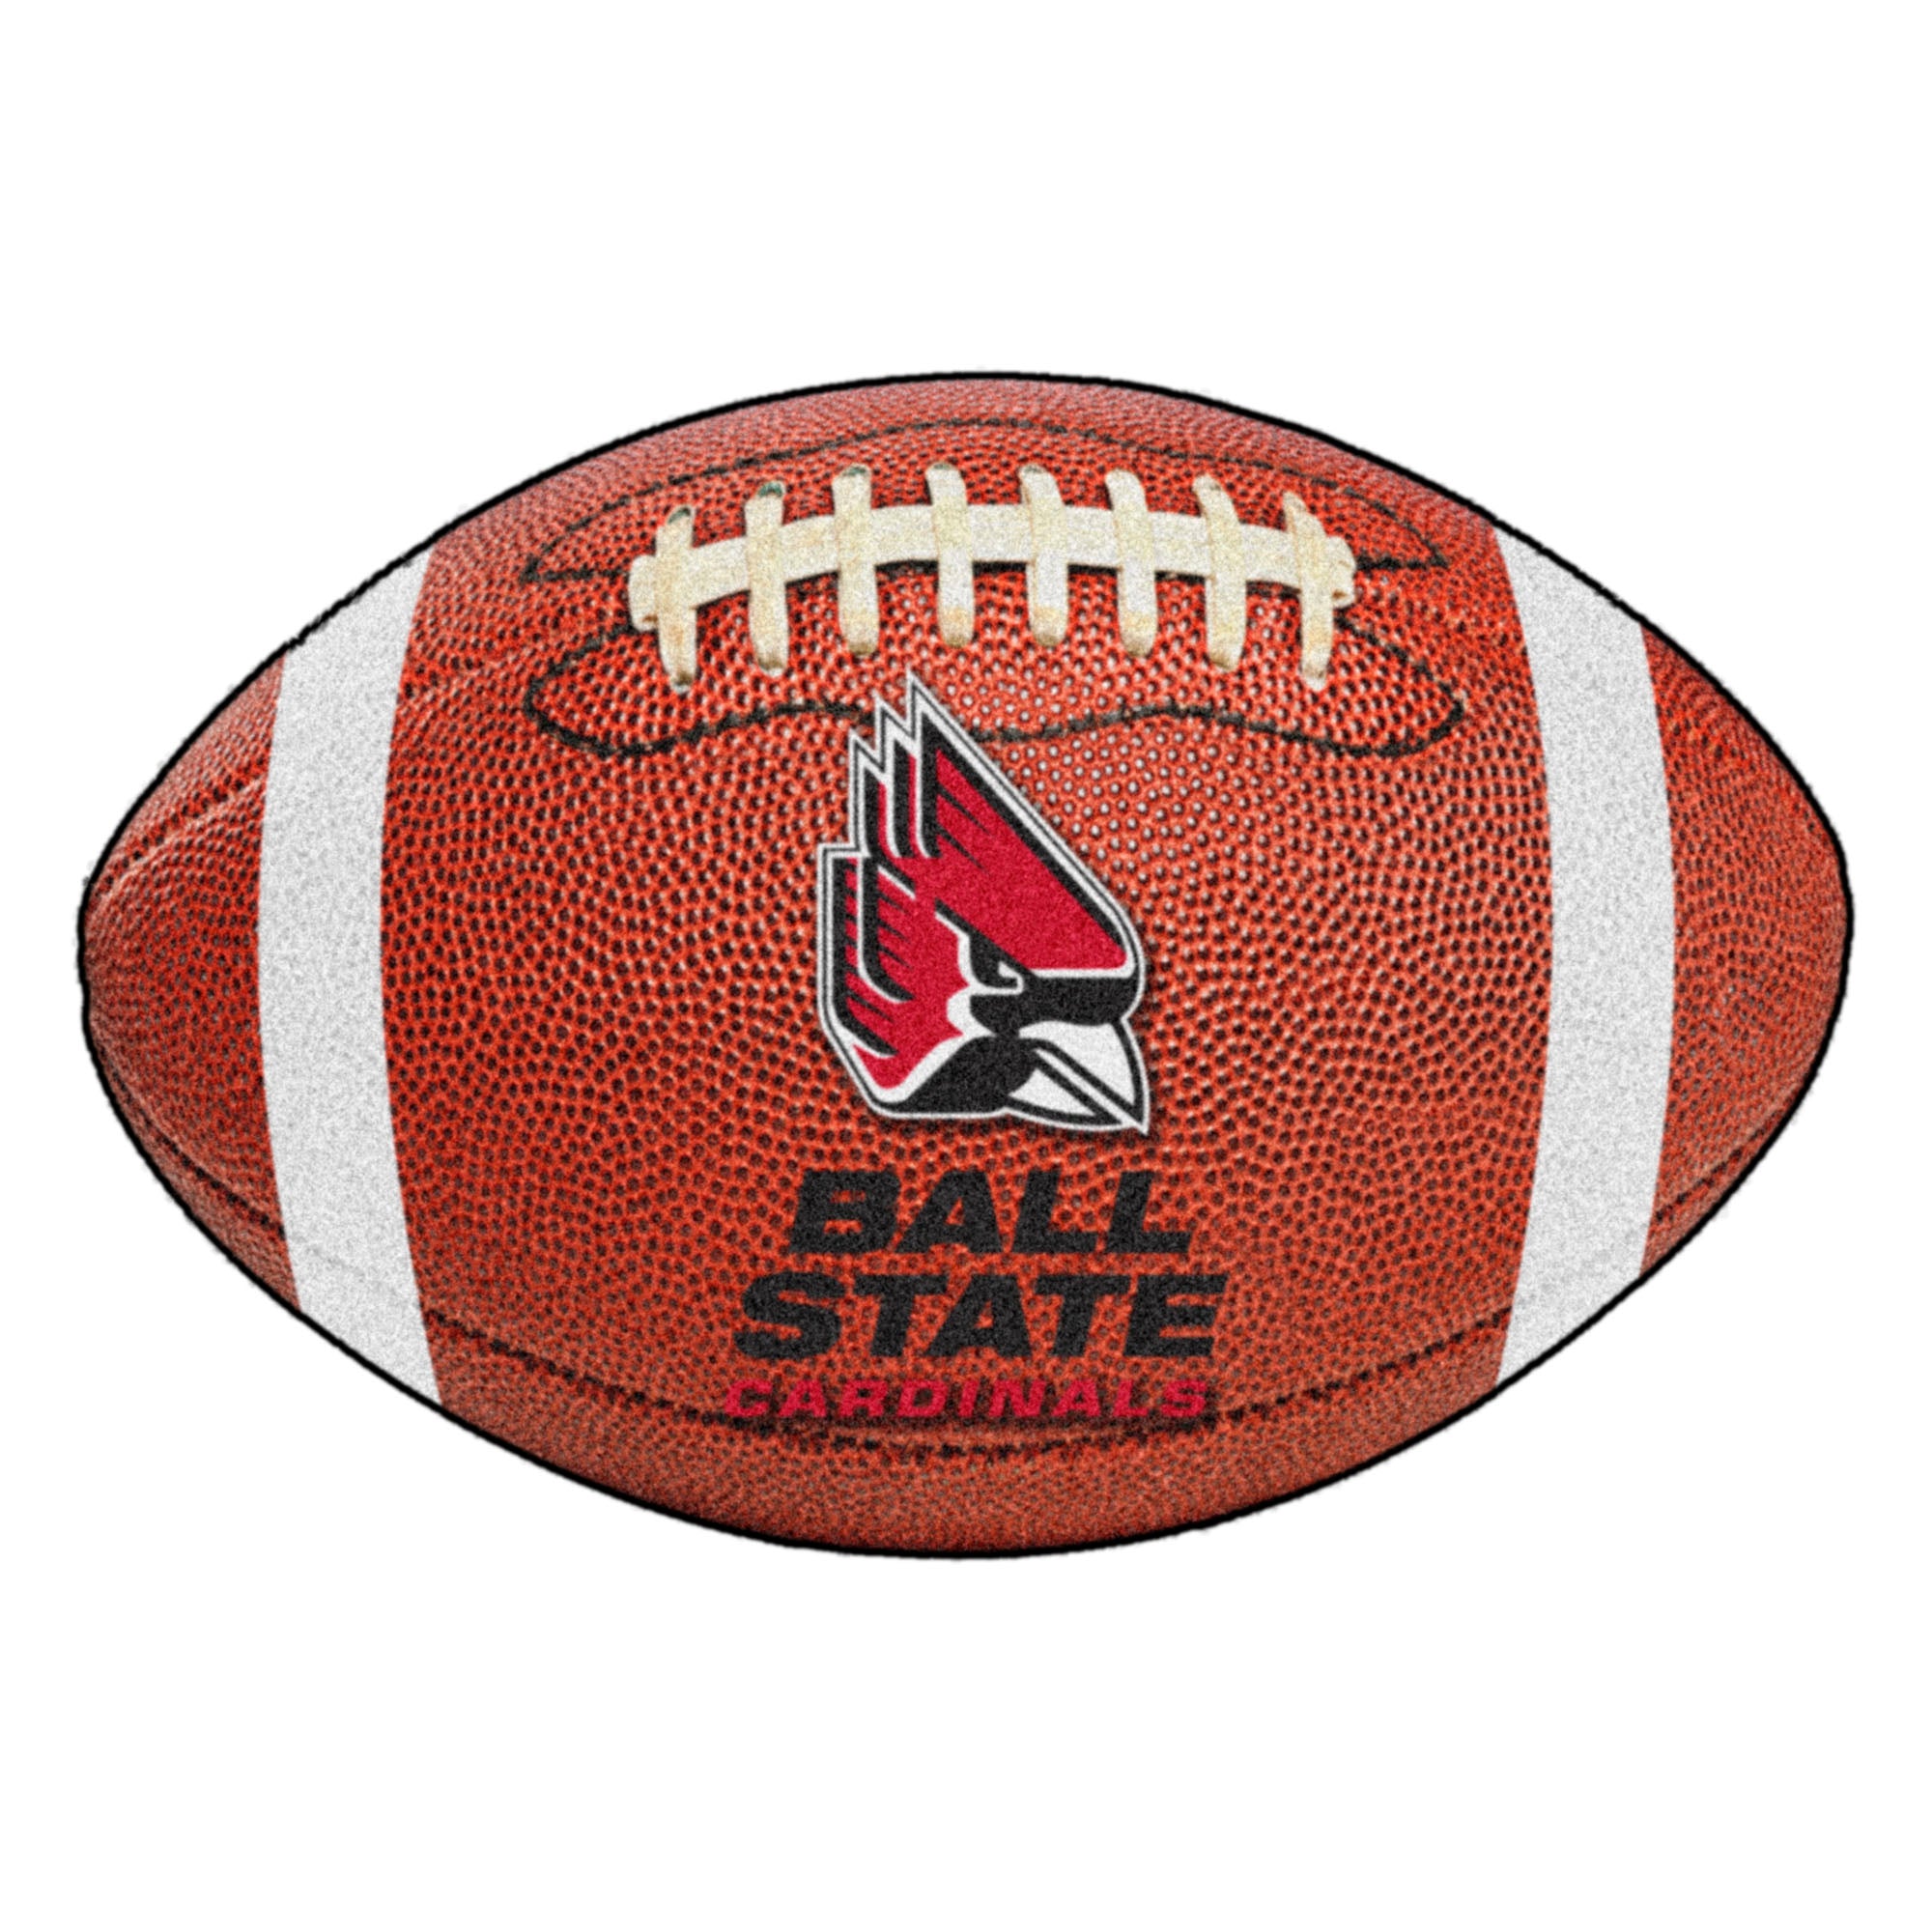 FANMATS, Ball State University Football Rug - 20.5in. x 32.5in.